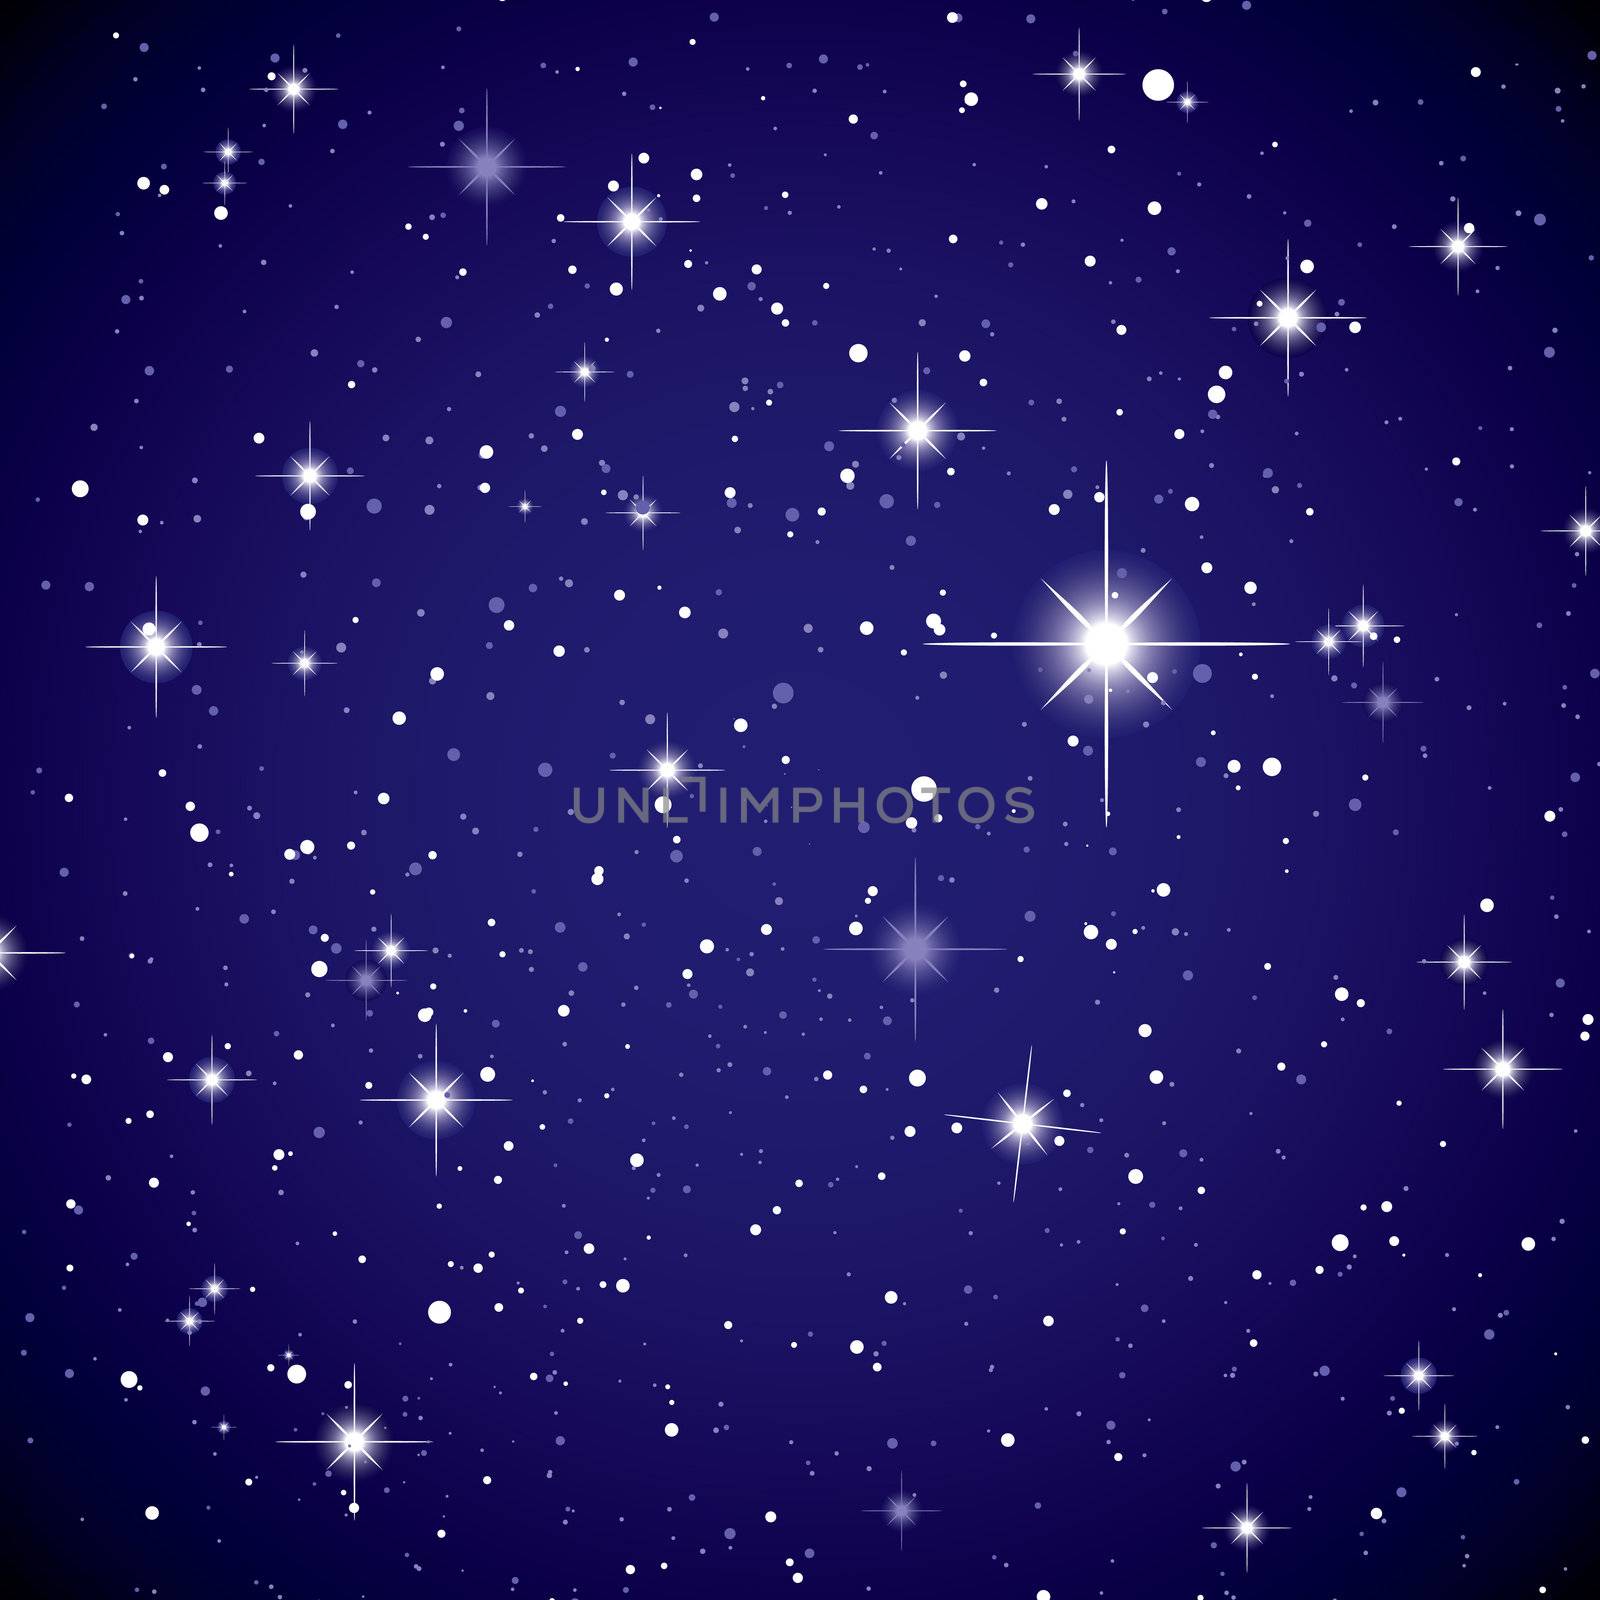 Sparkling nights sky with stars and dark space view